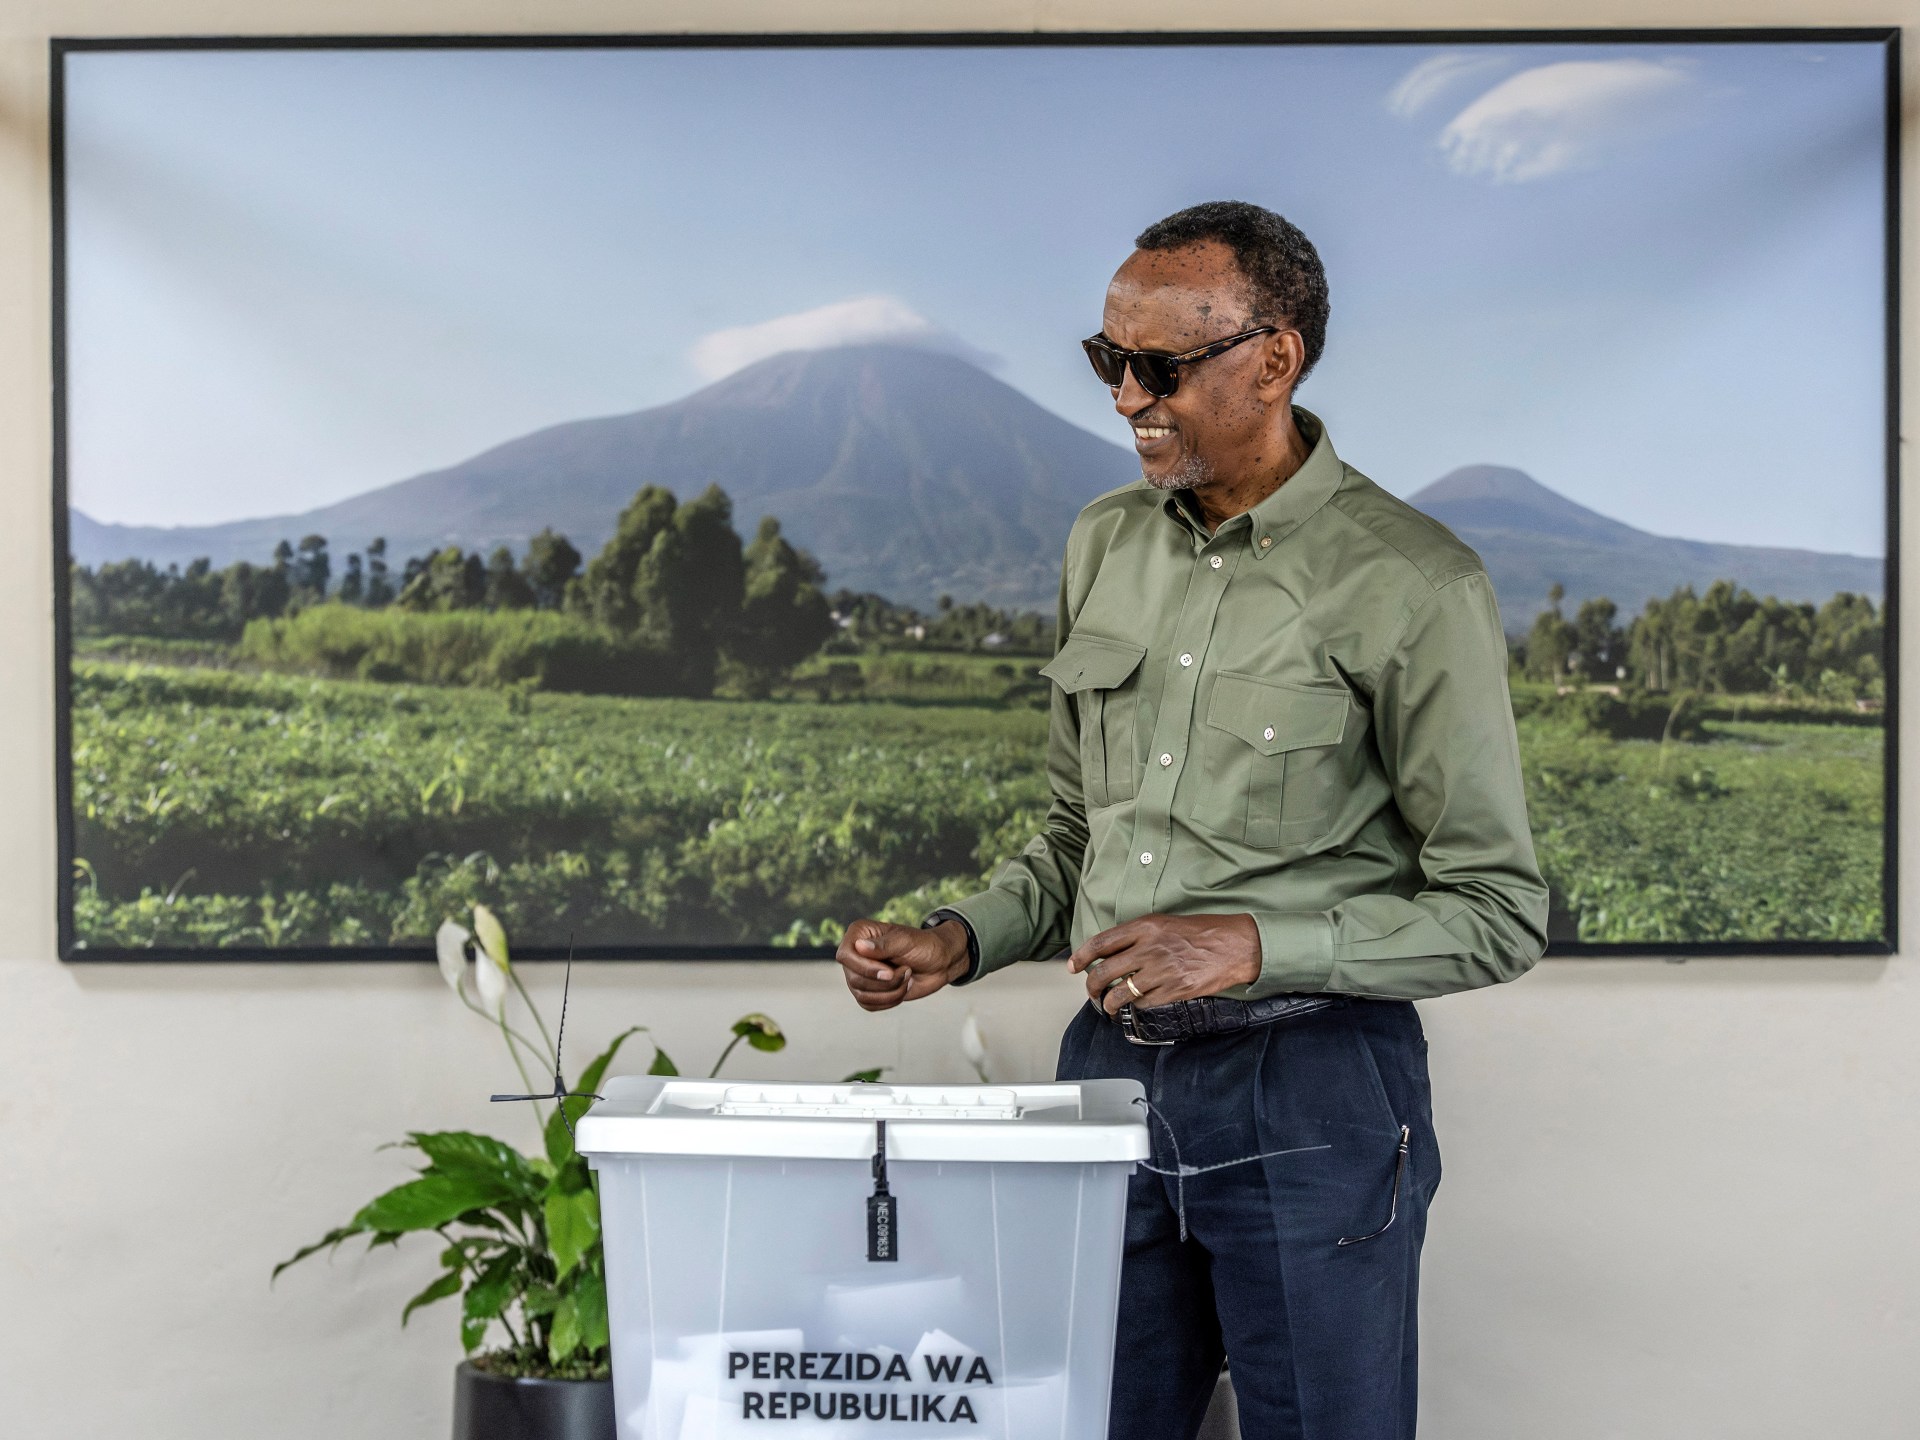 Rwandans have put their trust in a president who can deliver | Opinions